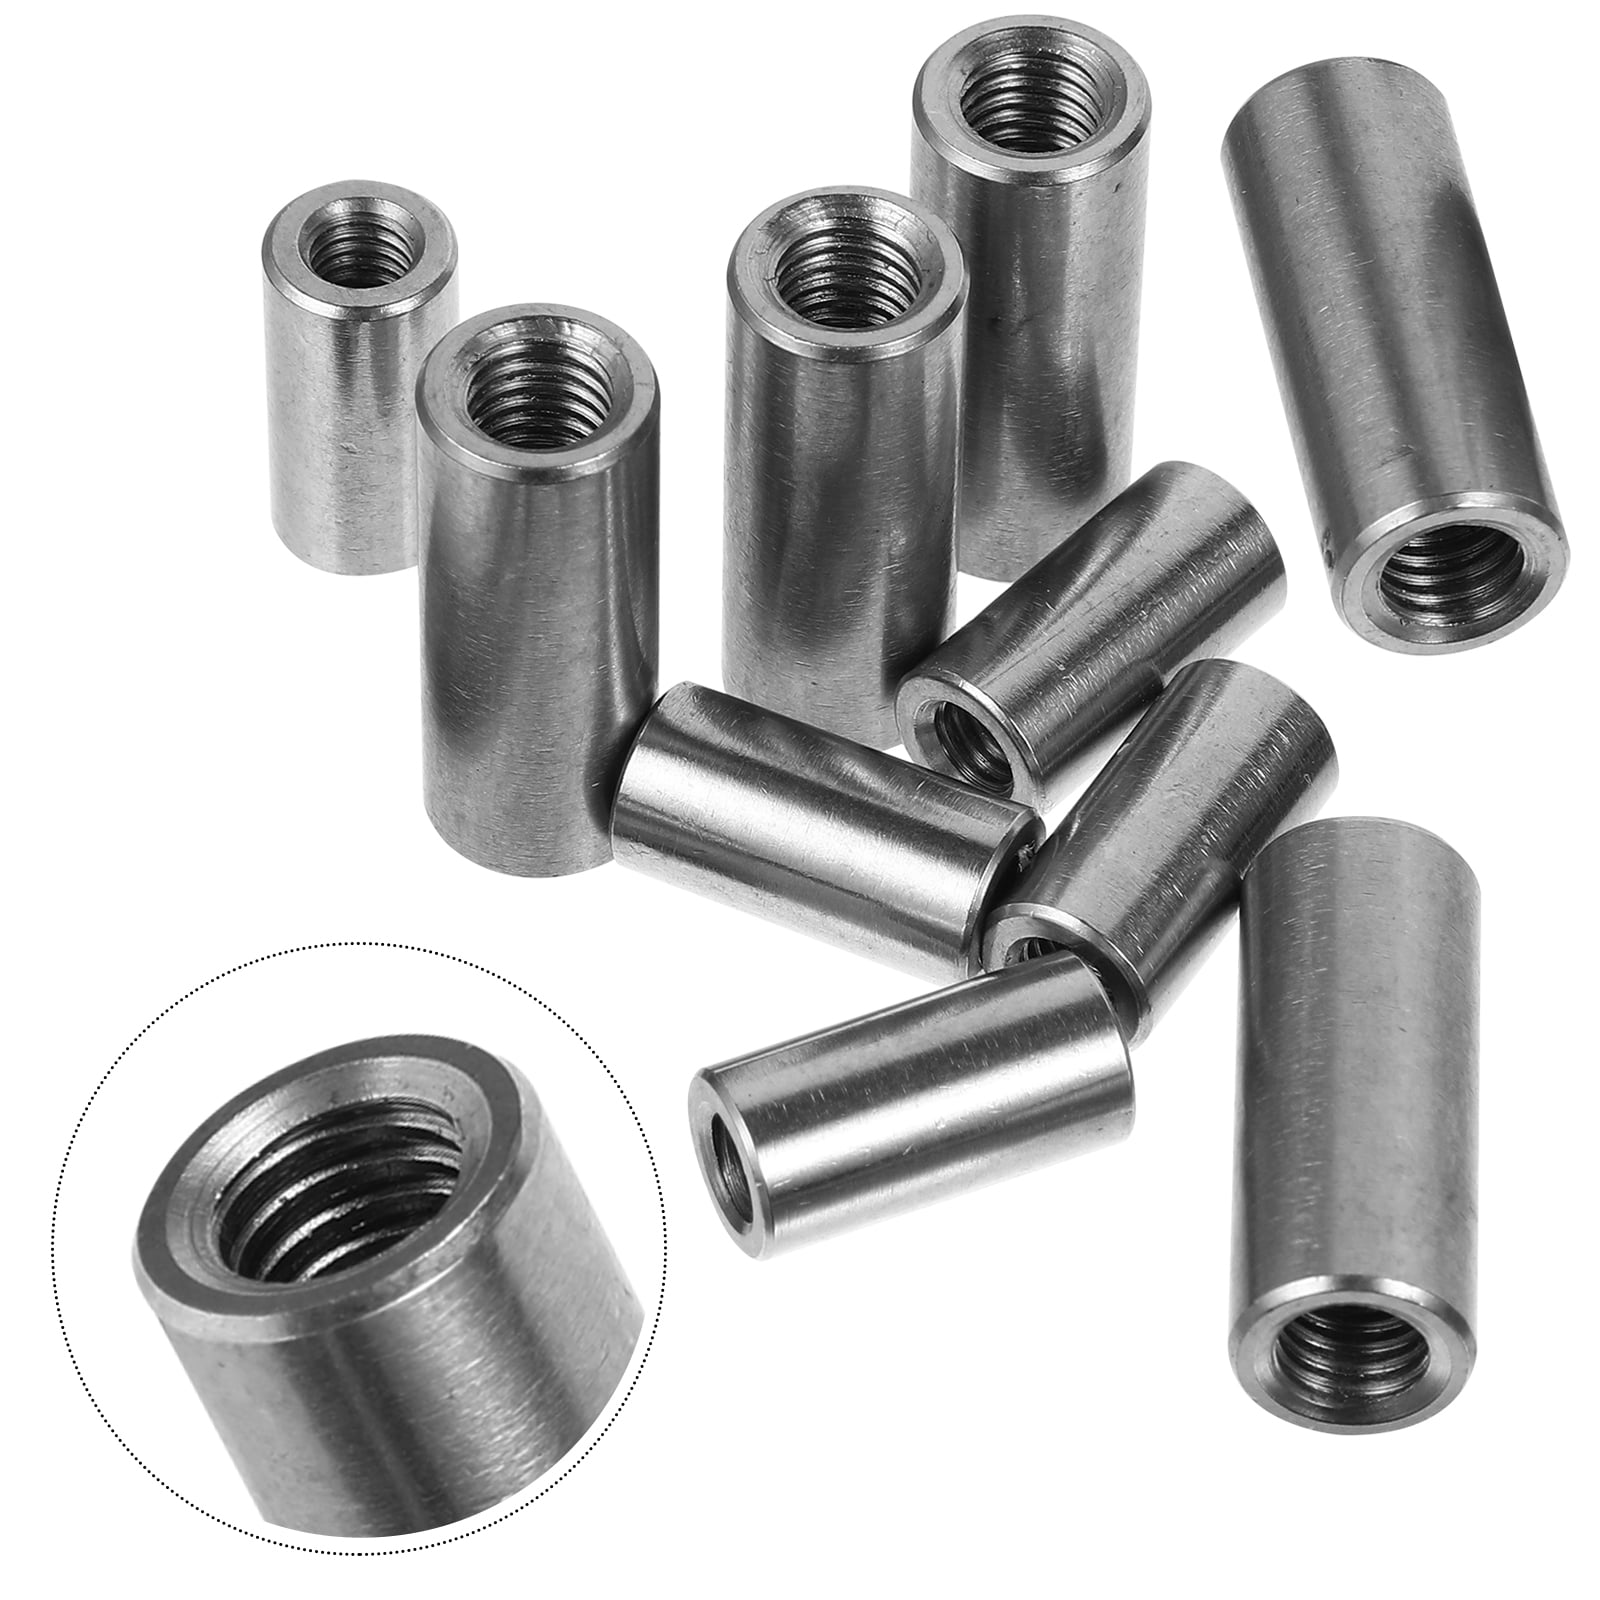 M3-M16 Full Thread Round Coupling Nut Sleeve for Thread Rod Stud Stainless Steel 